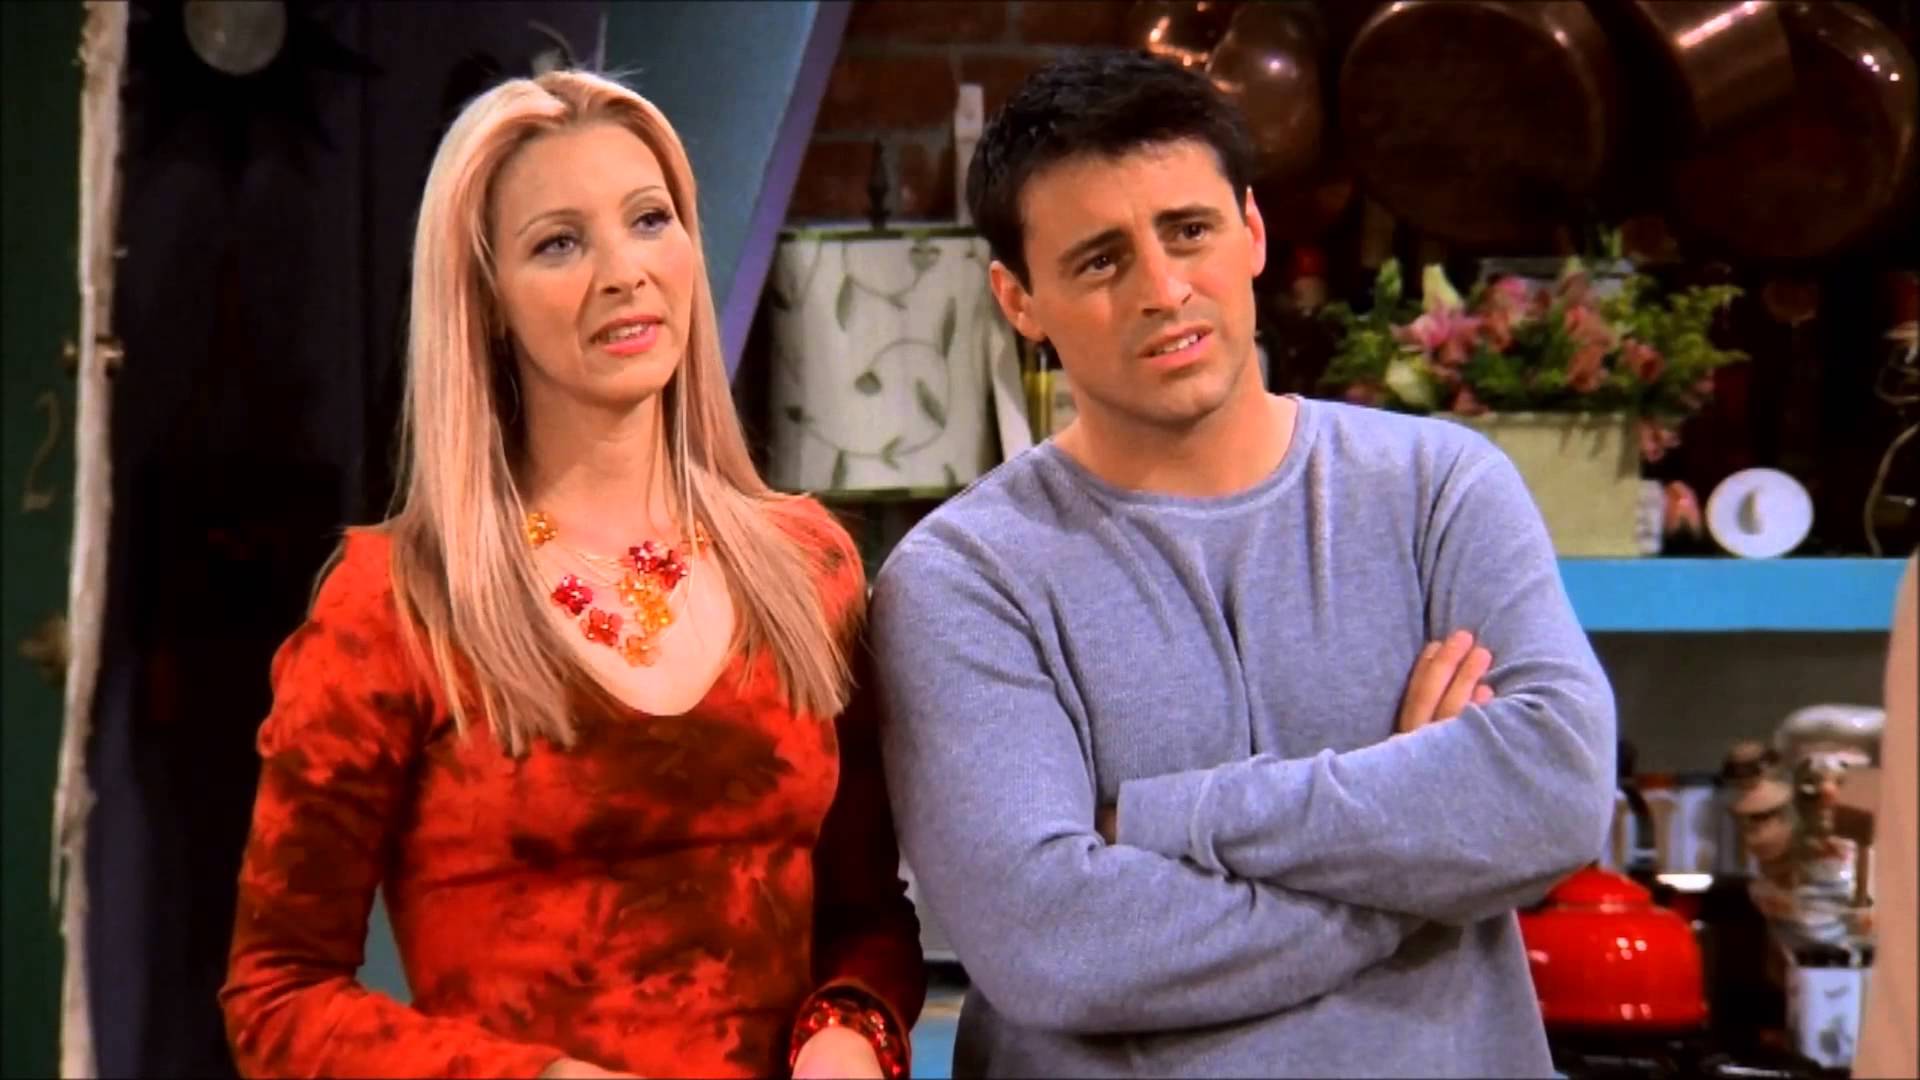 Friends: The reason Joey and Phoebe never got together was not